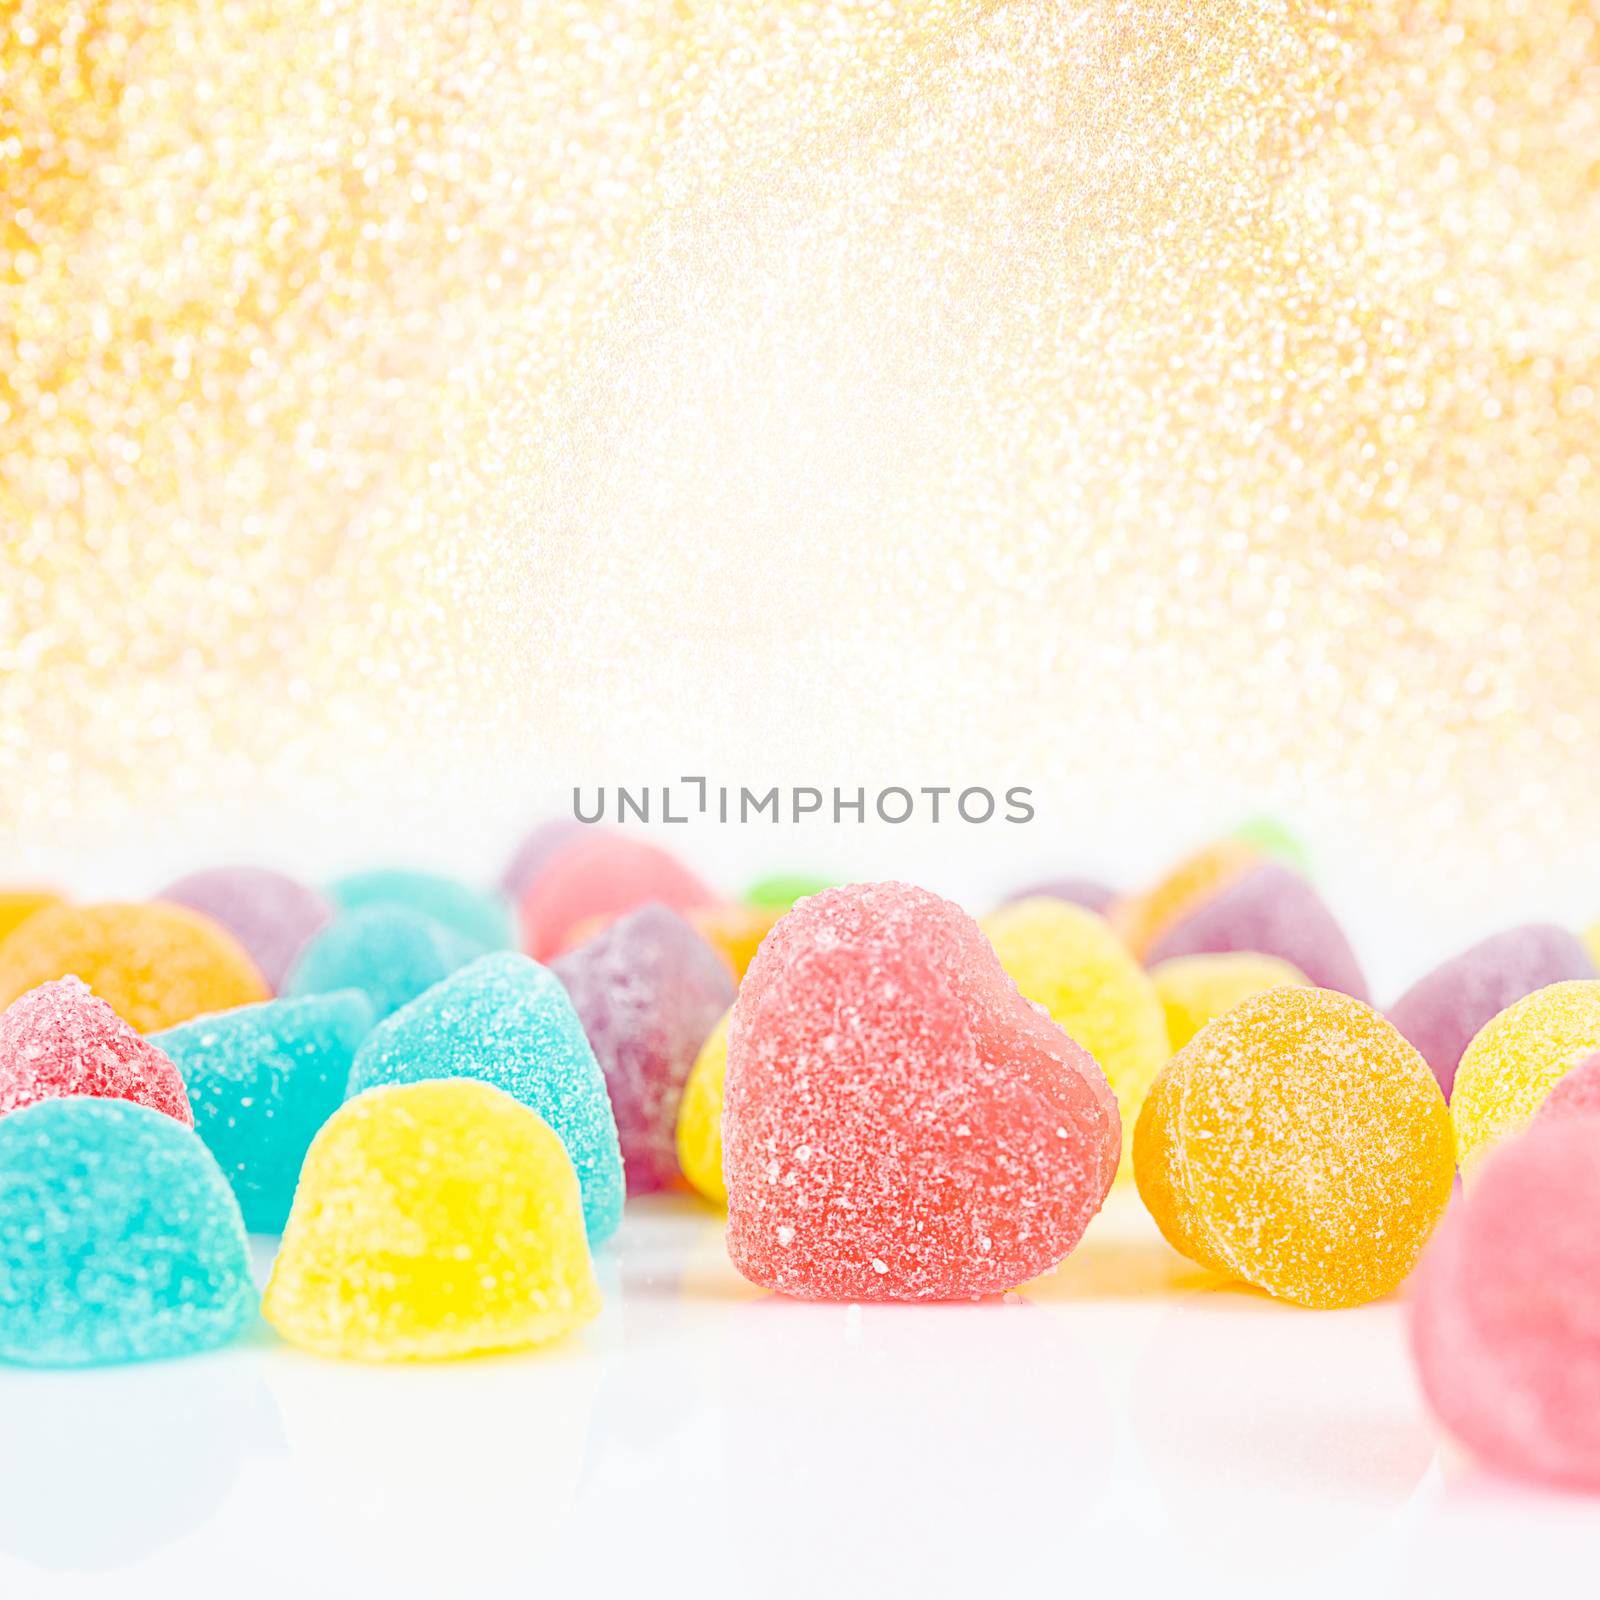 Colorful sugar candies on golden bokeh background.